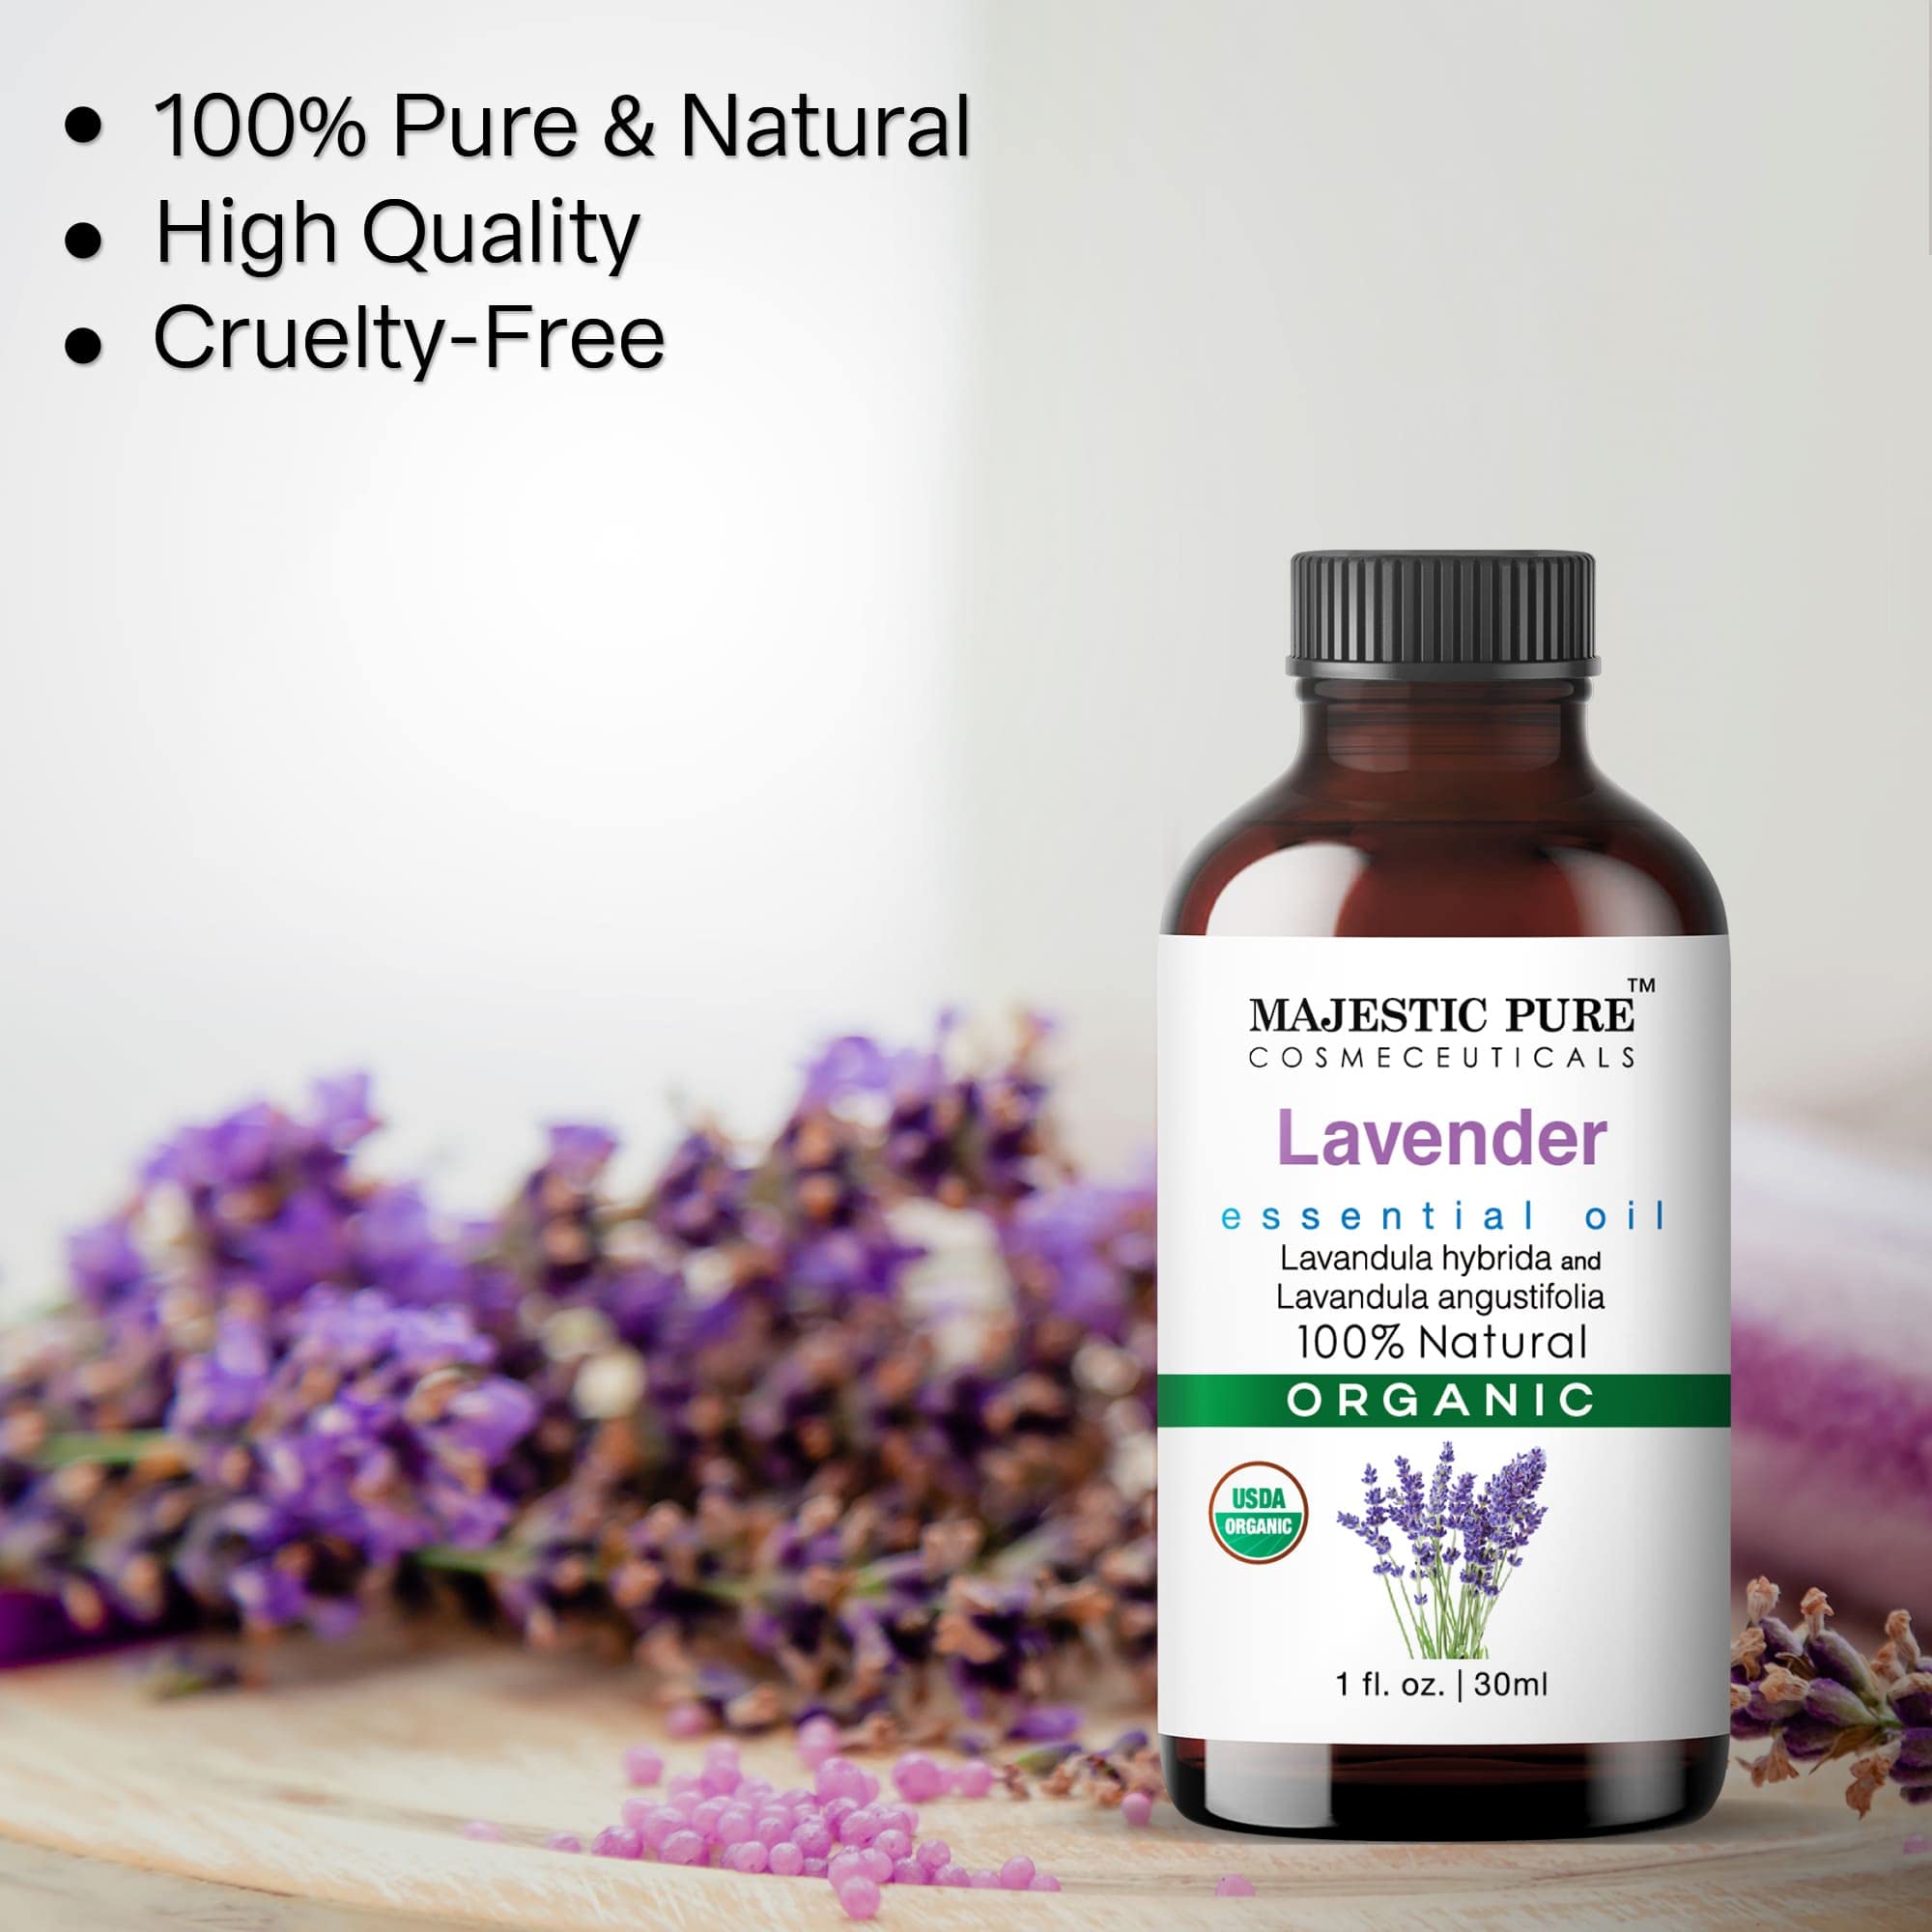 Majestic Pure Lavender USDA Organic Essential Oil | 100% Organic Essential Oil for Aromatherapy, Massage and Topical Uses | 1 fl. Oz